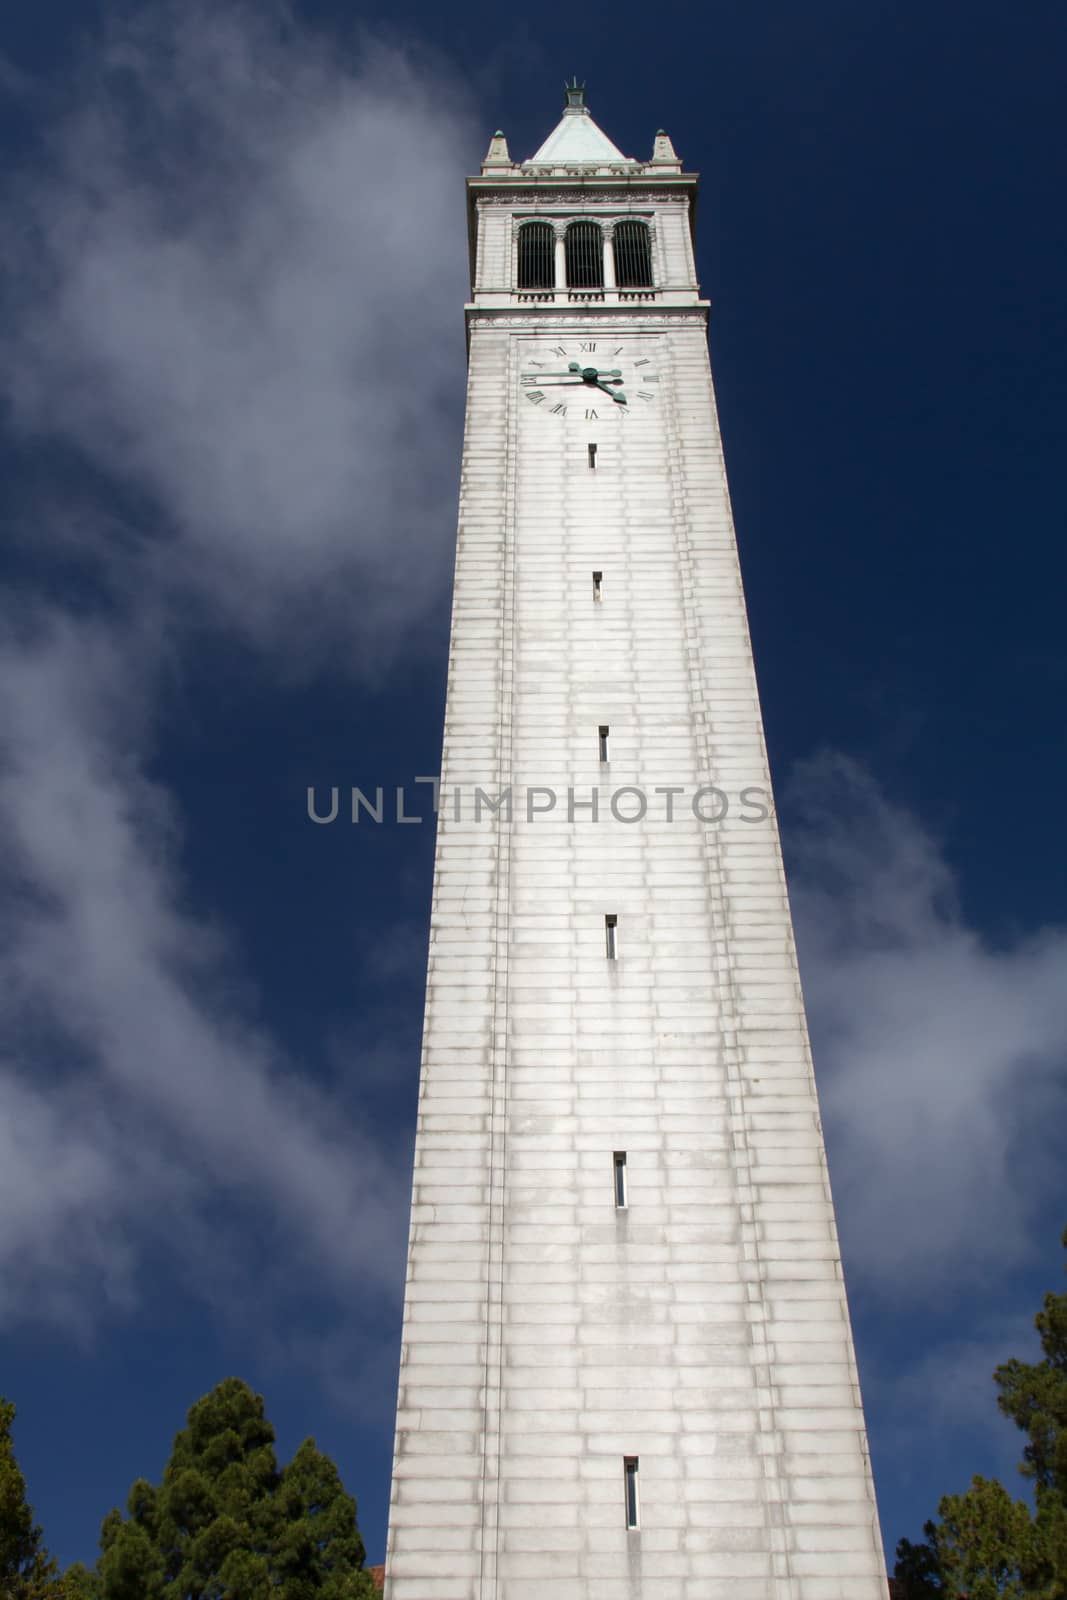 BERKELEY, CA/USA - June 15: Historic Sather Tower overlooking the University of California at Berkeley is the third largest bell tower in the world. June 15, 2013.